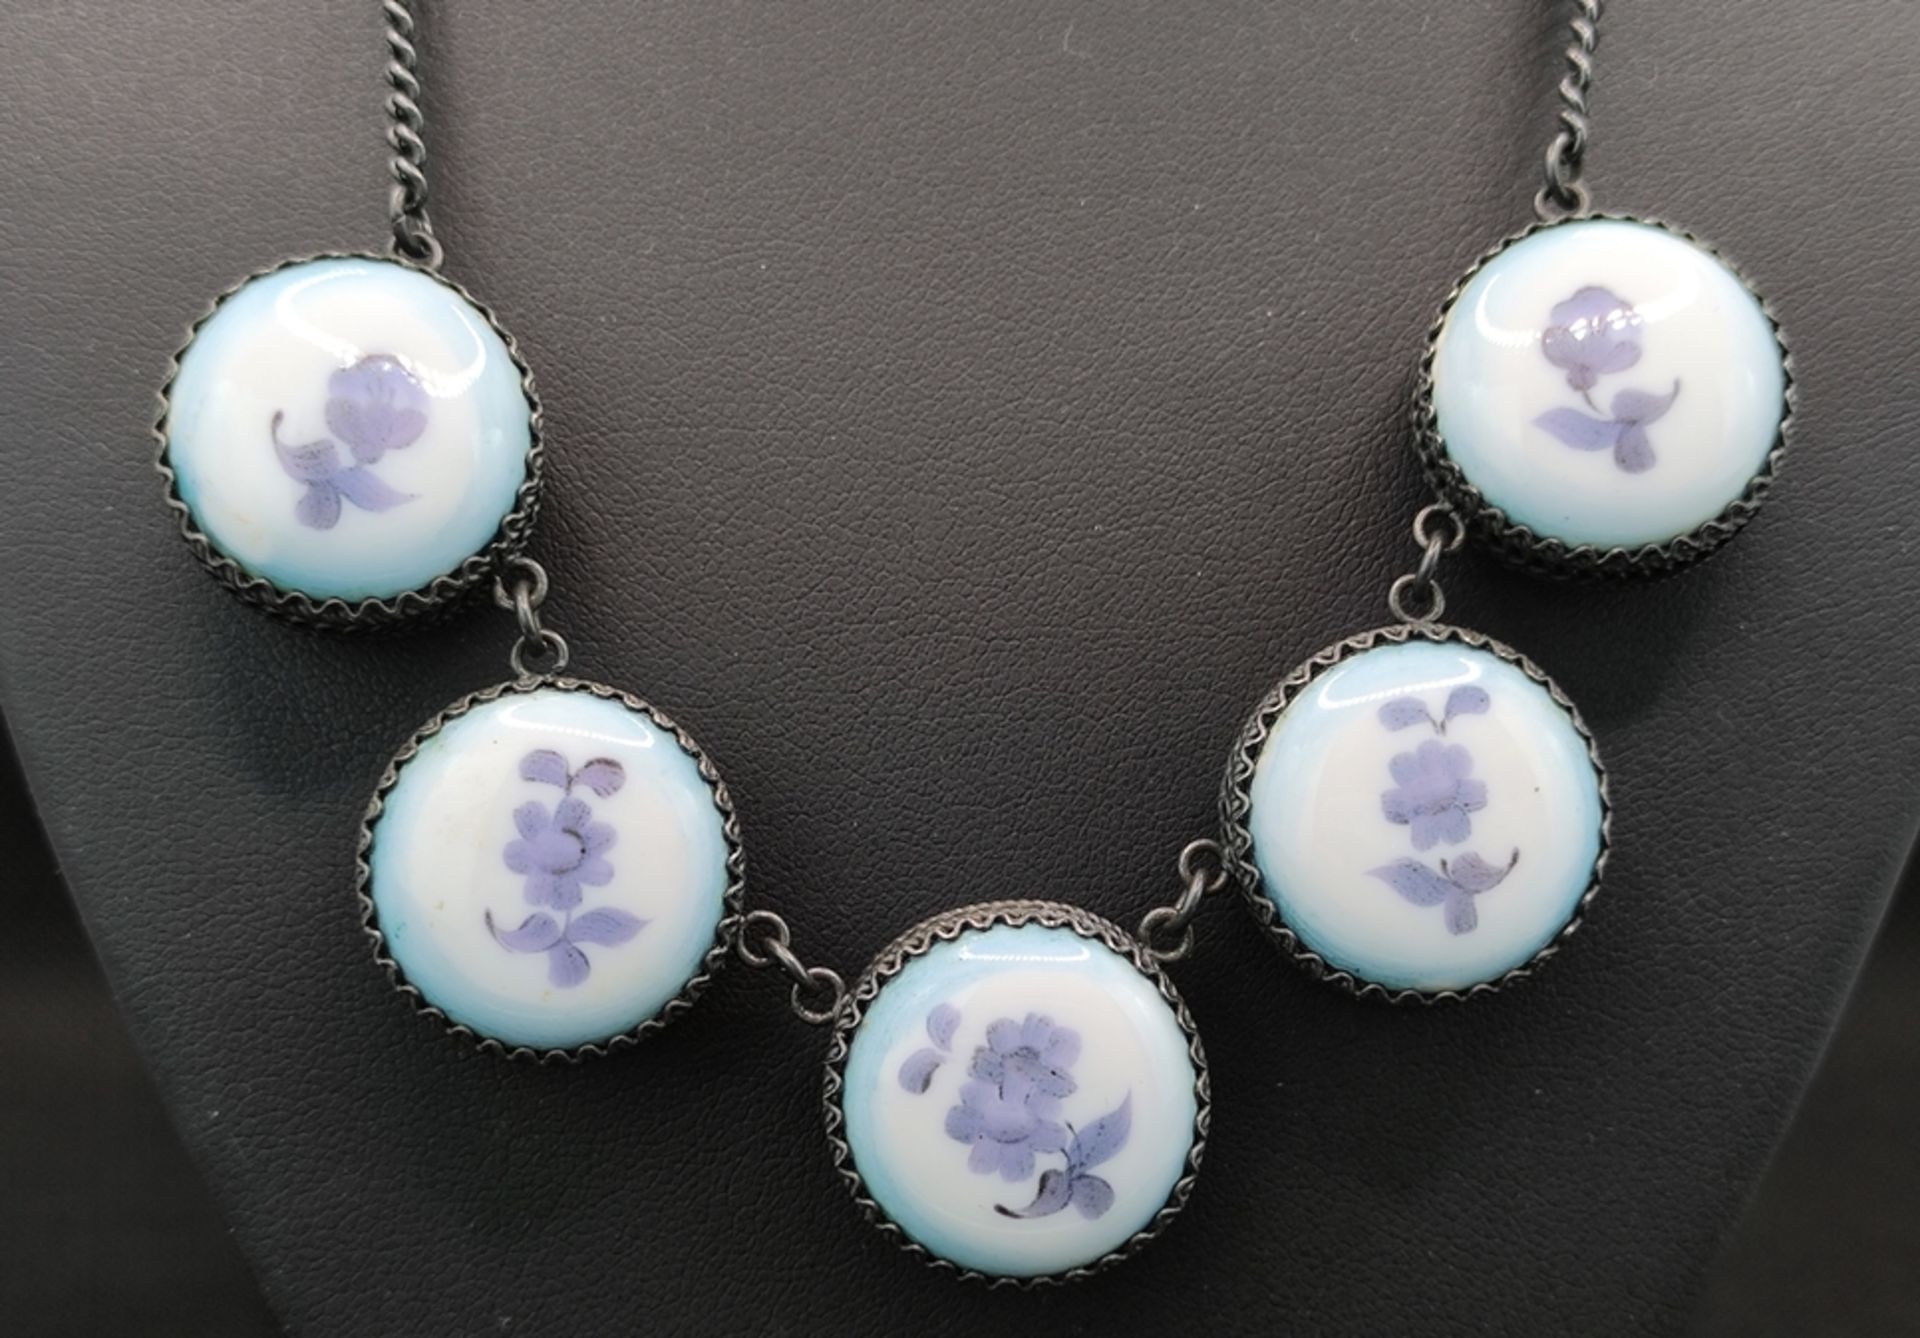 Porcelain necklace, middle part with 5 elements, these are decorated with purple flowers, length 48 - Image 3 of 4